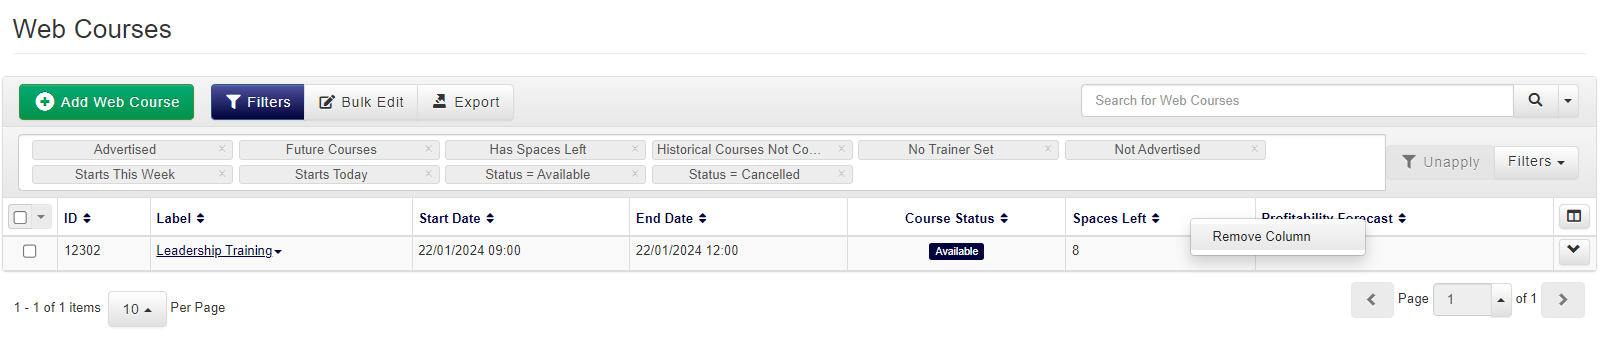 Courses Web Datagrid with Remove column button available